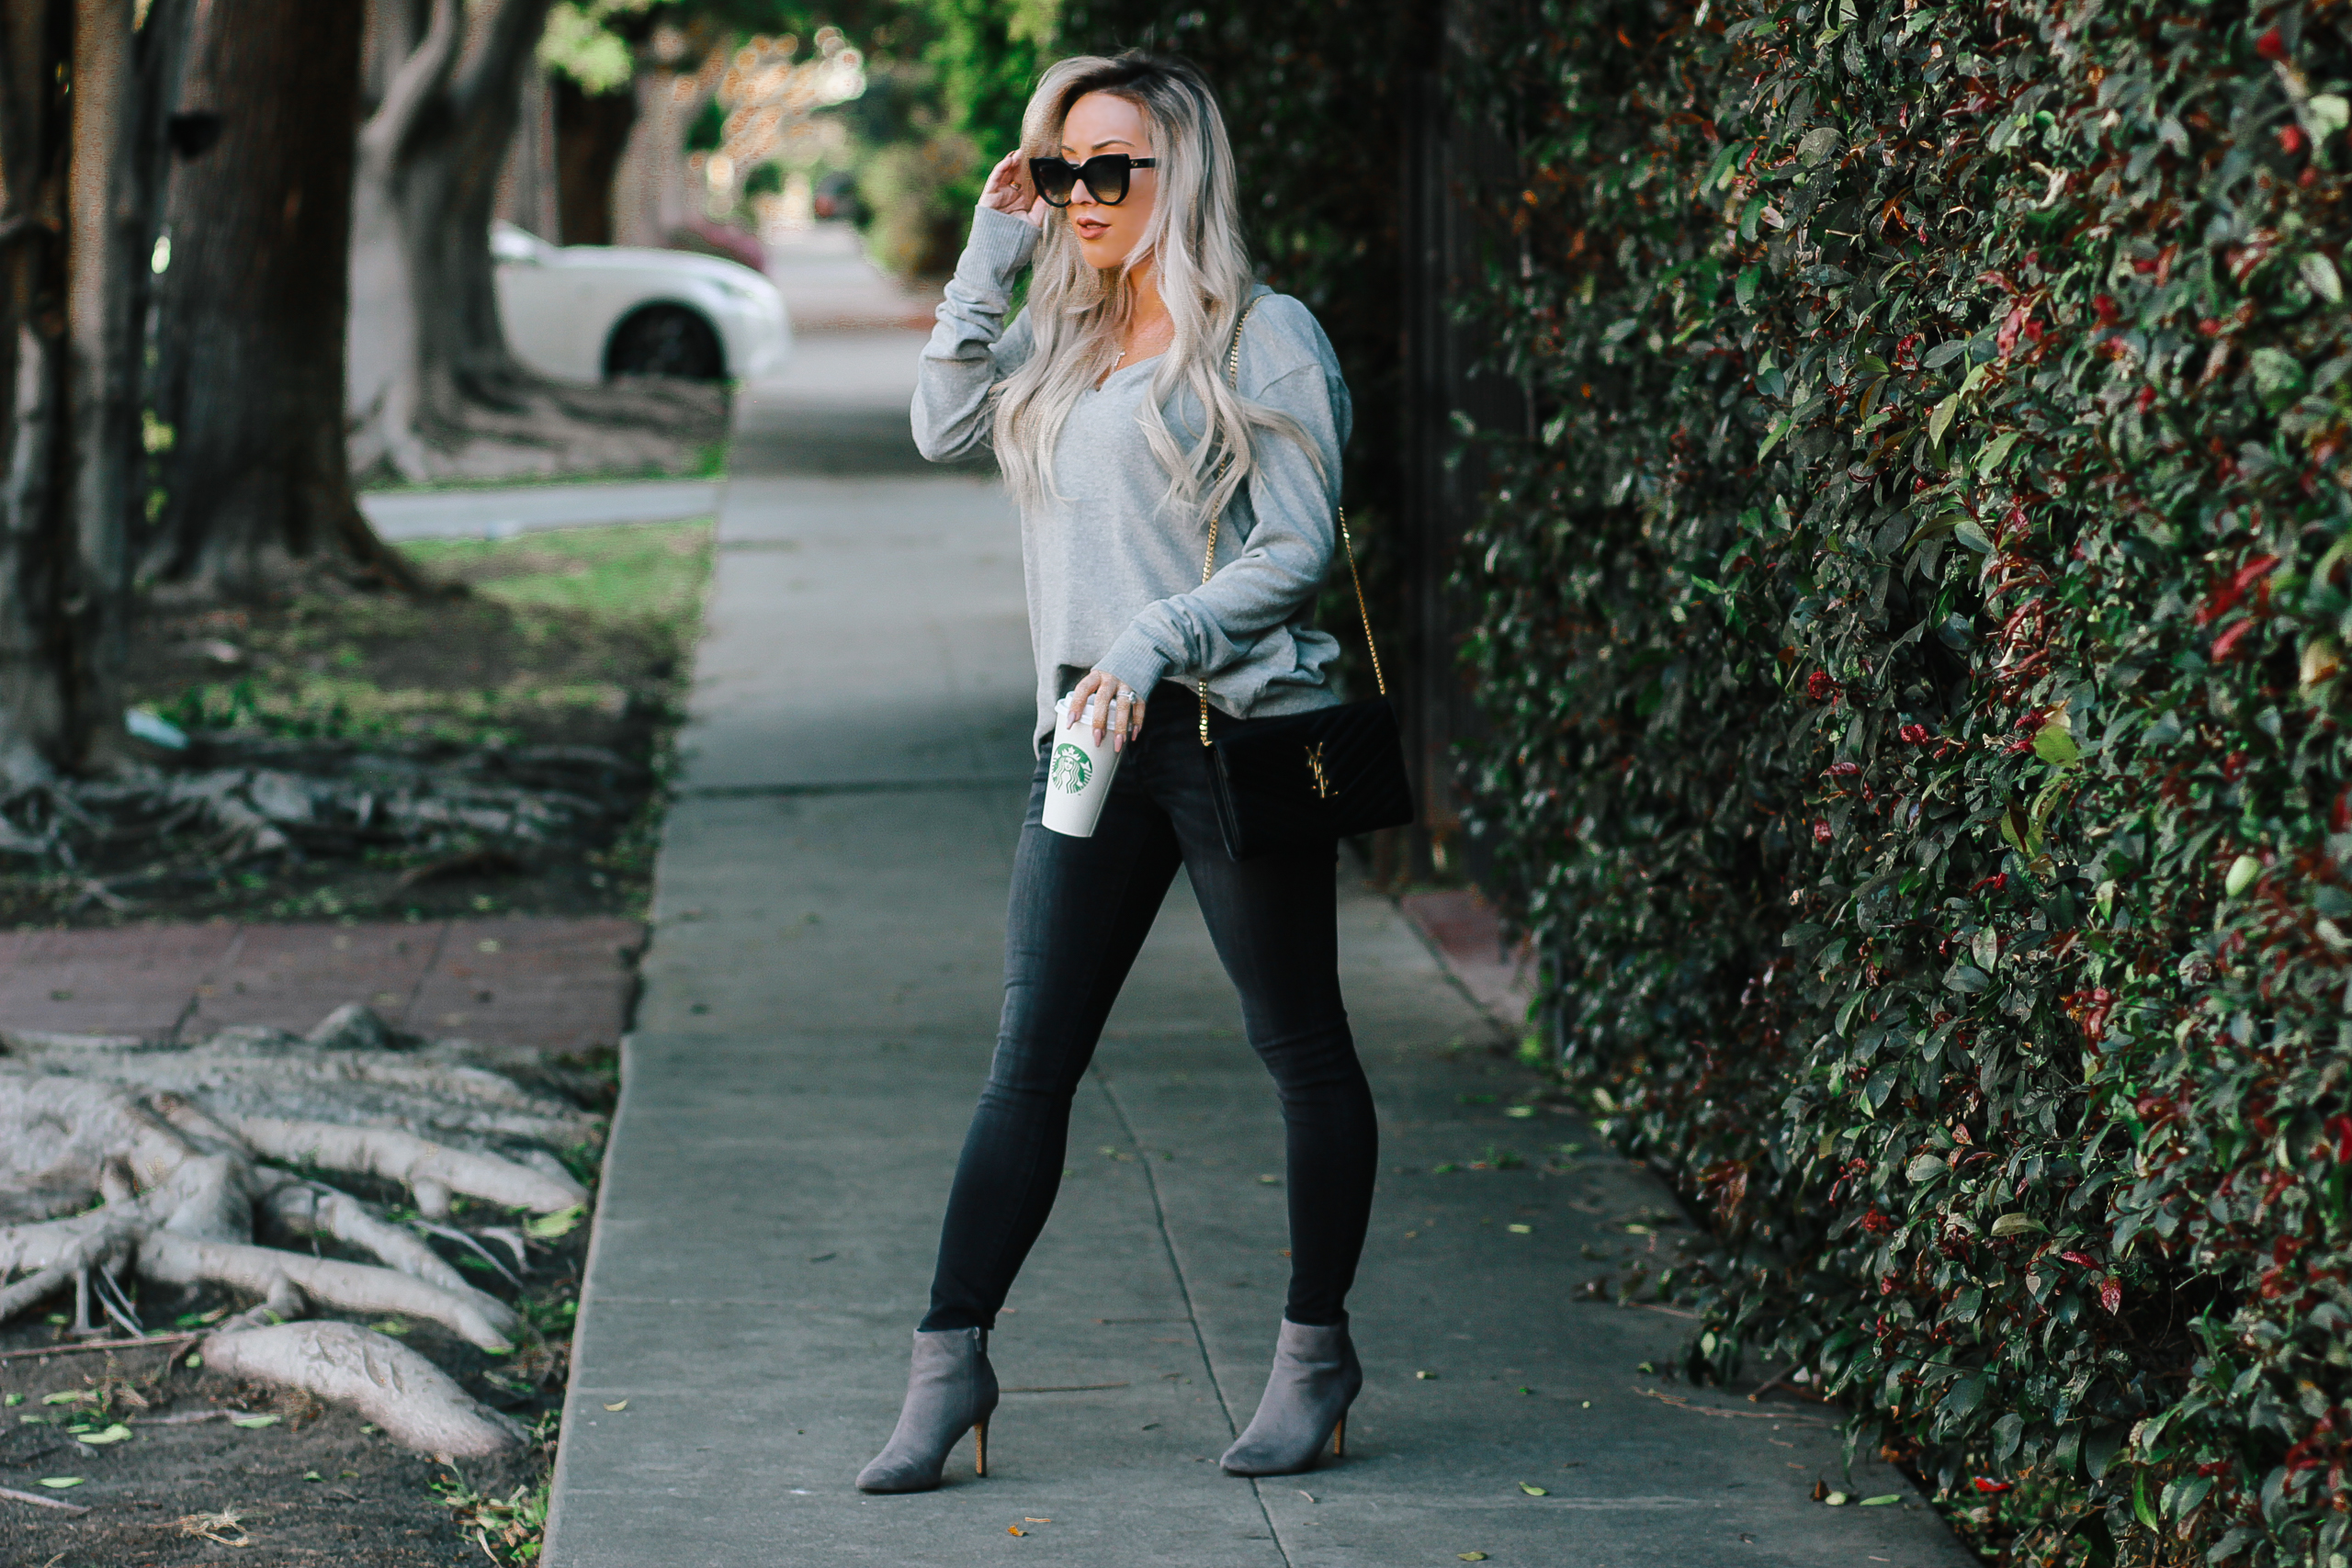 Grey Oversized Pullover | Black Jeans | Black YSL Bag | Gucci Sunglasses | Blondie in the city by Hayley Larue